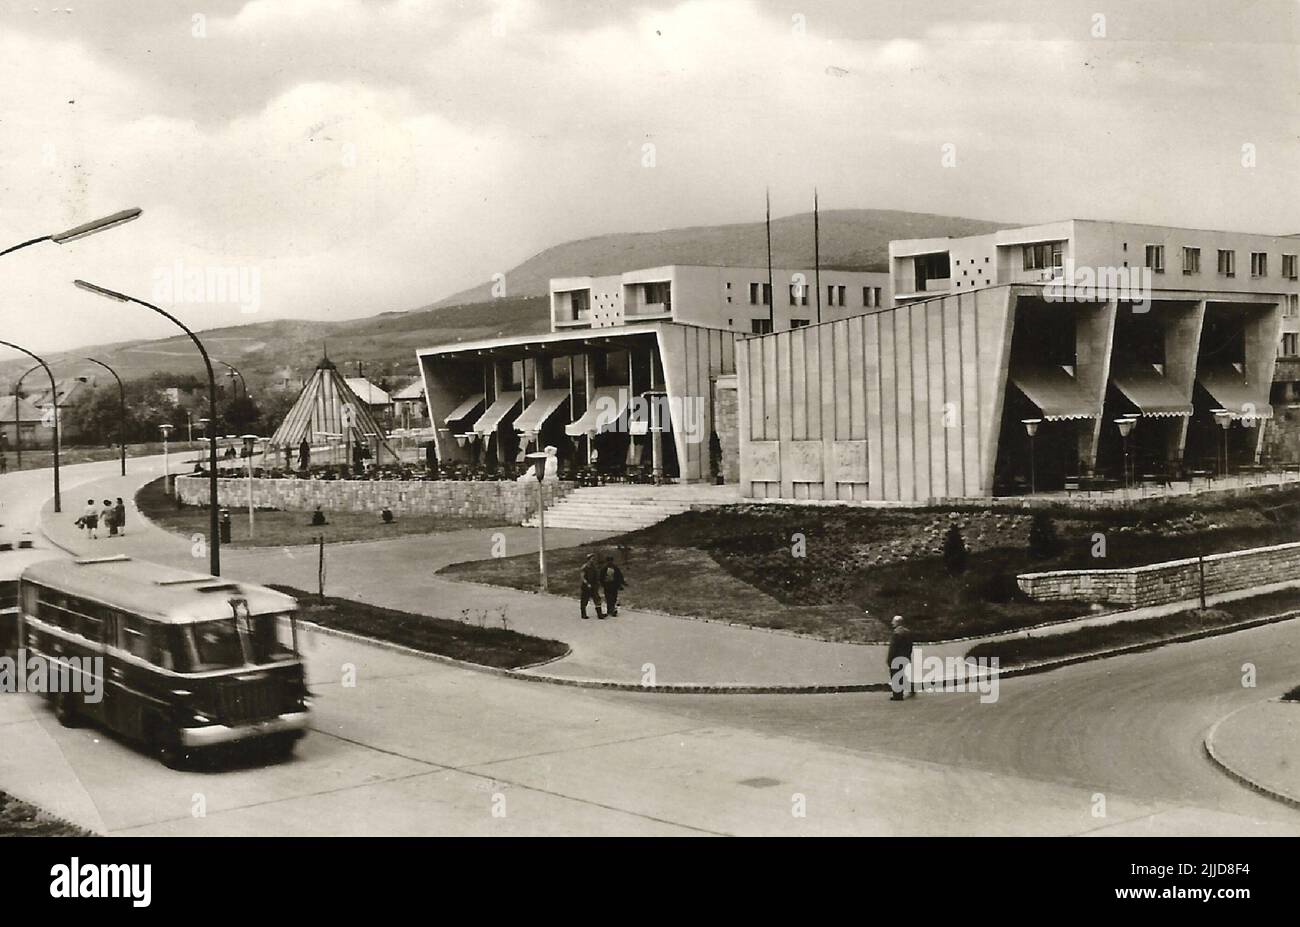 Olympics Restaurant in Urani City in 1971. Olimpia Restaurant in Uránváros in Pécs. The Local History Collection of Csorba Gyz Könyvtár Library has been collecting photos and postcards related to Baranya County since January 1966. According to the data updated on 1st February 2016, the collection consists of 11,565 copies. As the result of the digitisation project that started in 2012, the Collection includes about 59,000 black-and-white and coloured records of different sizes and types, which are searchable through the electronic catalogue. The famous postcard collector Tibor Endre Tóth has p Stock Photo